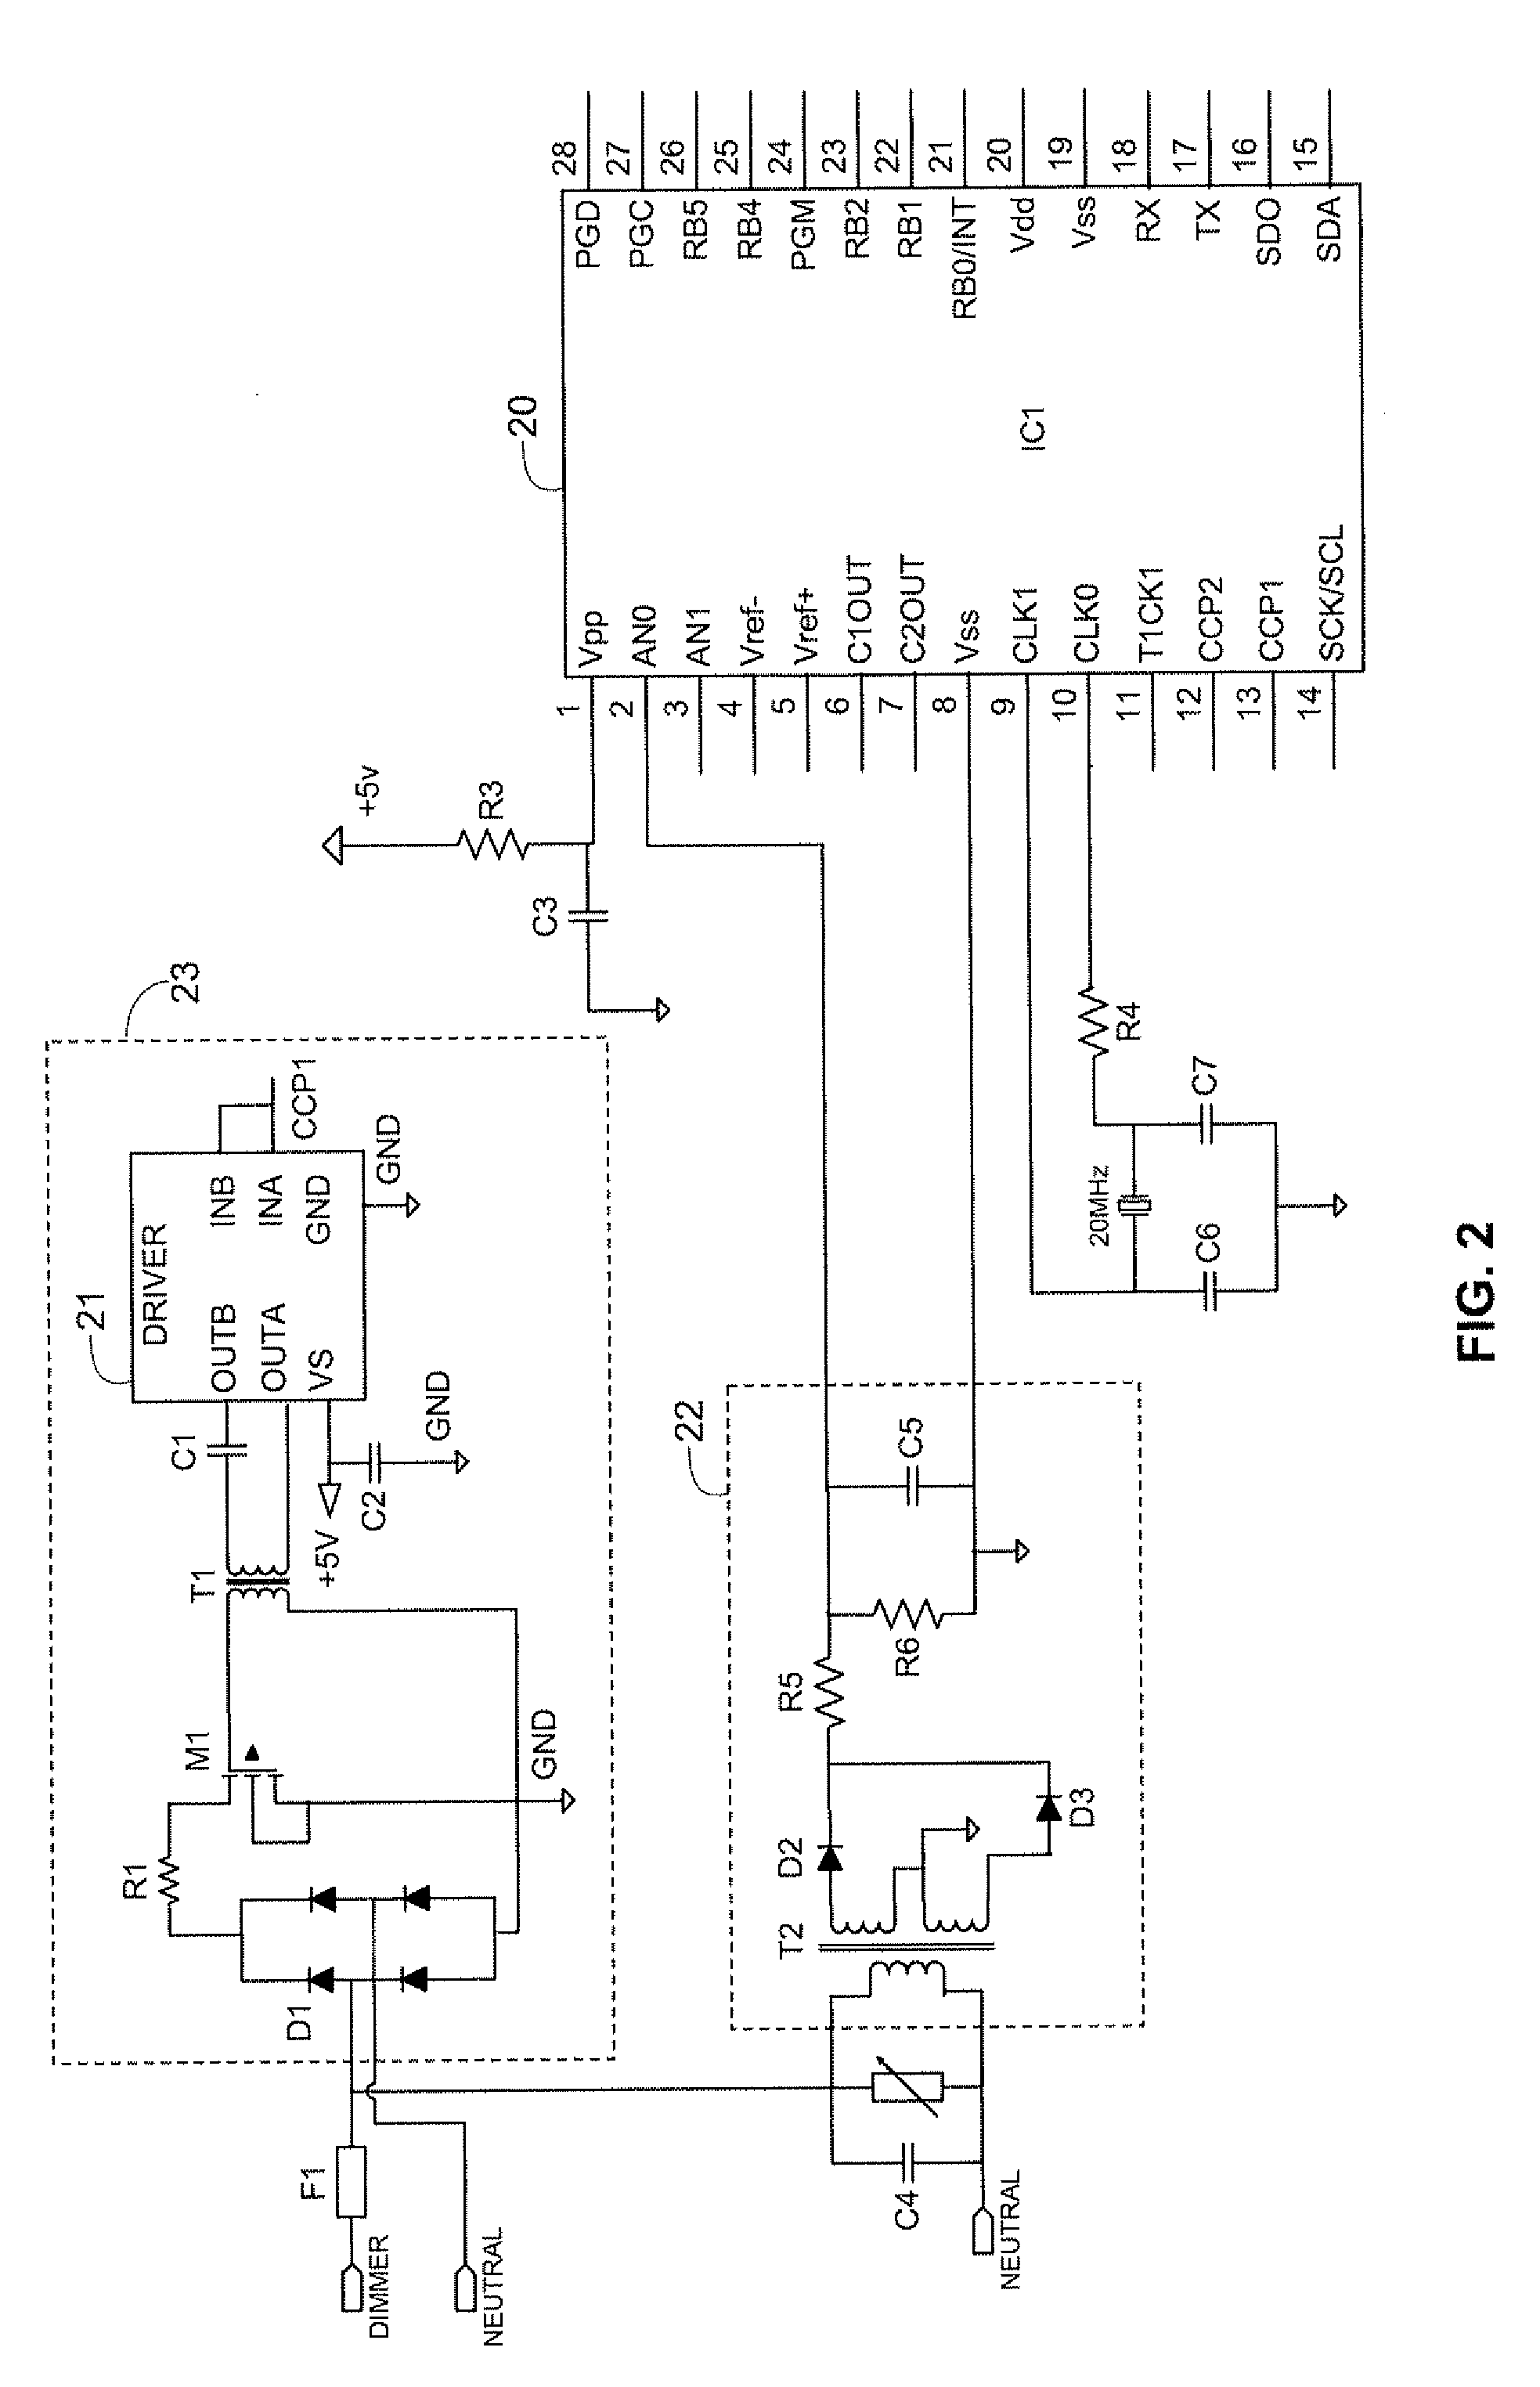 Controller and method for controlling an intensity of a light emitting diode (LED) using a conventional ac dimmer